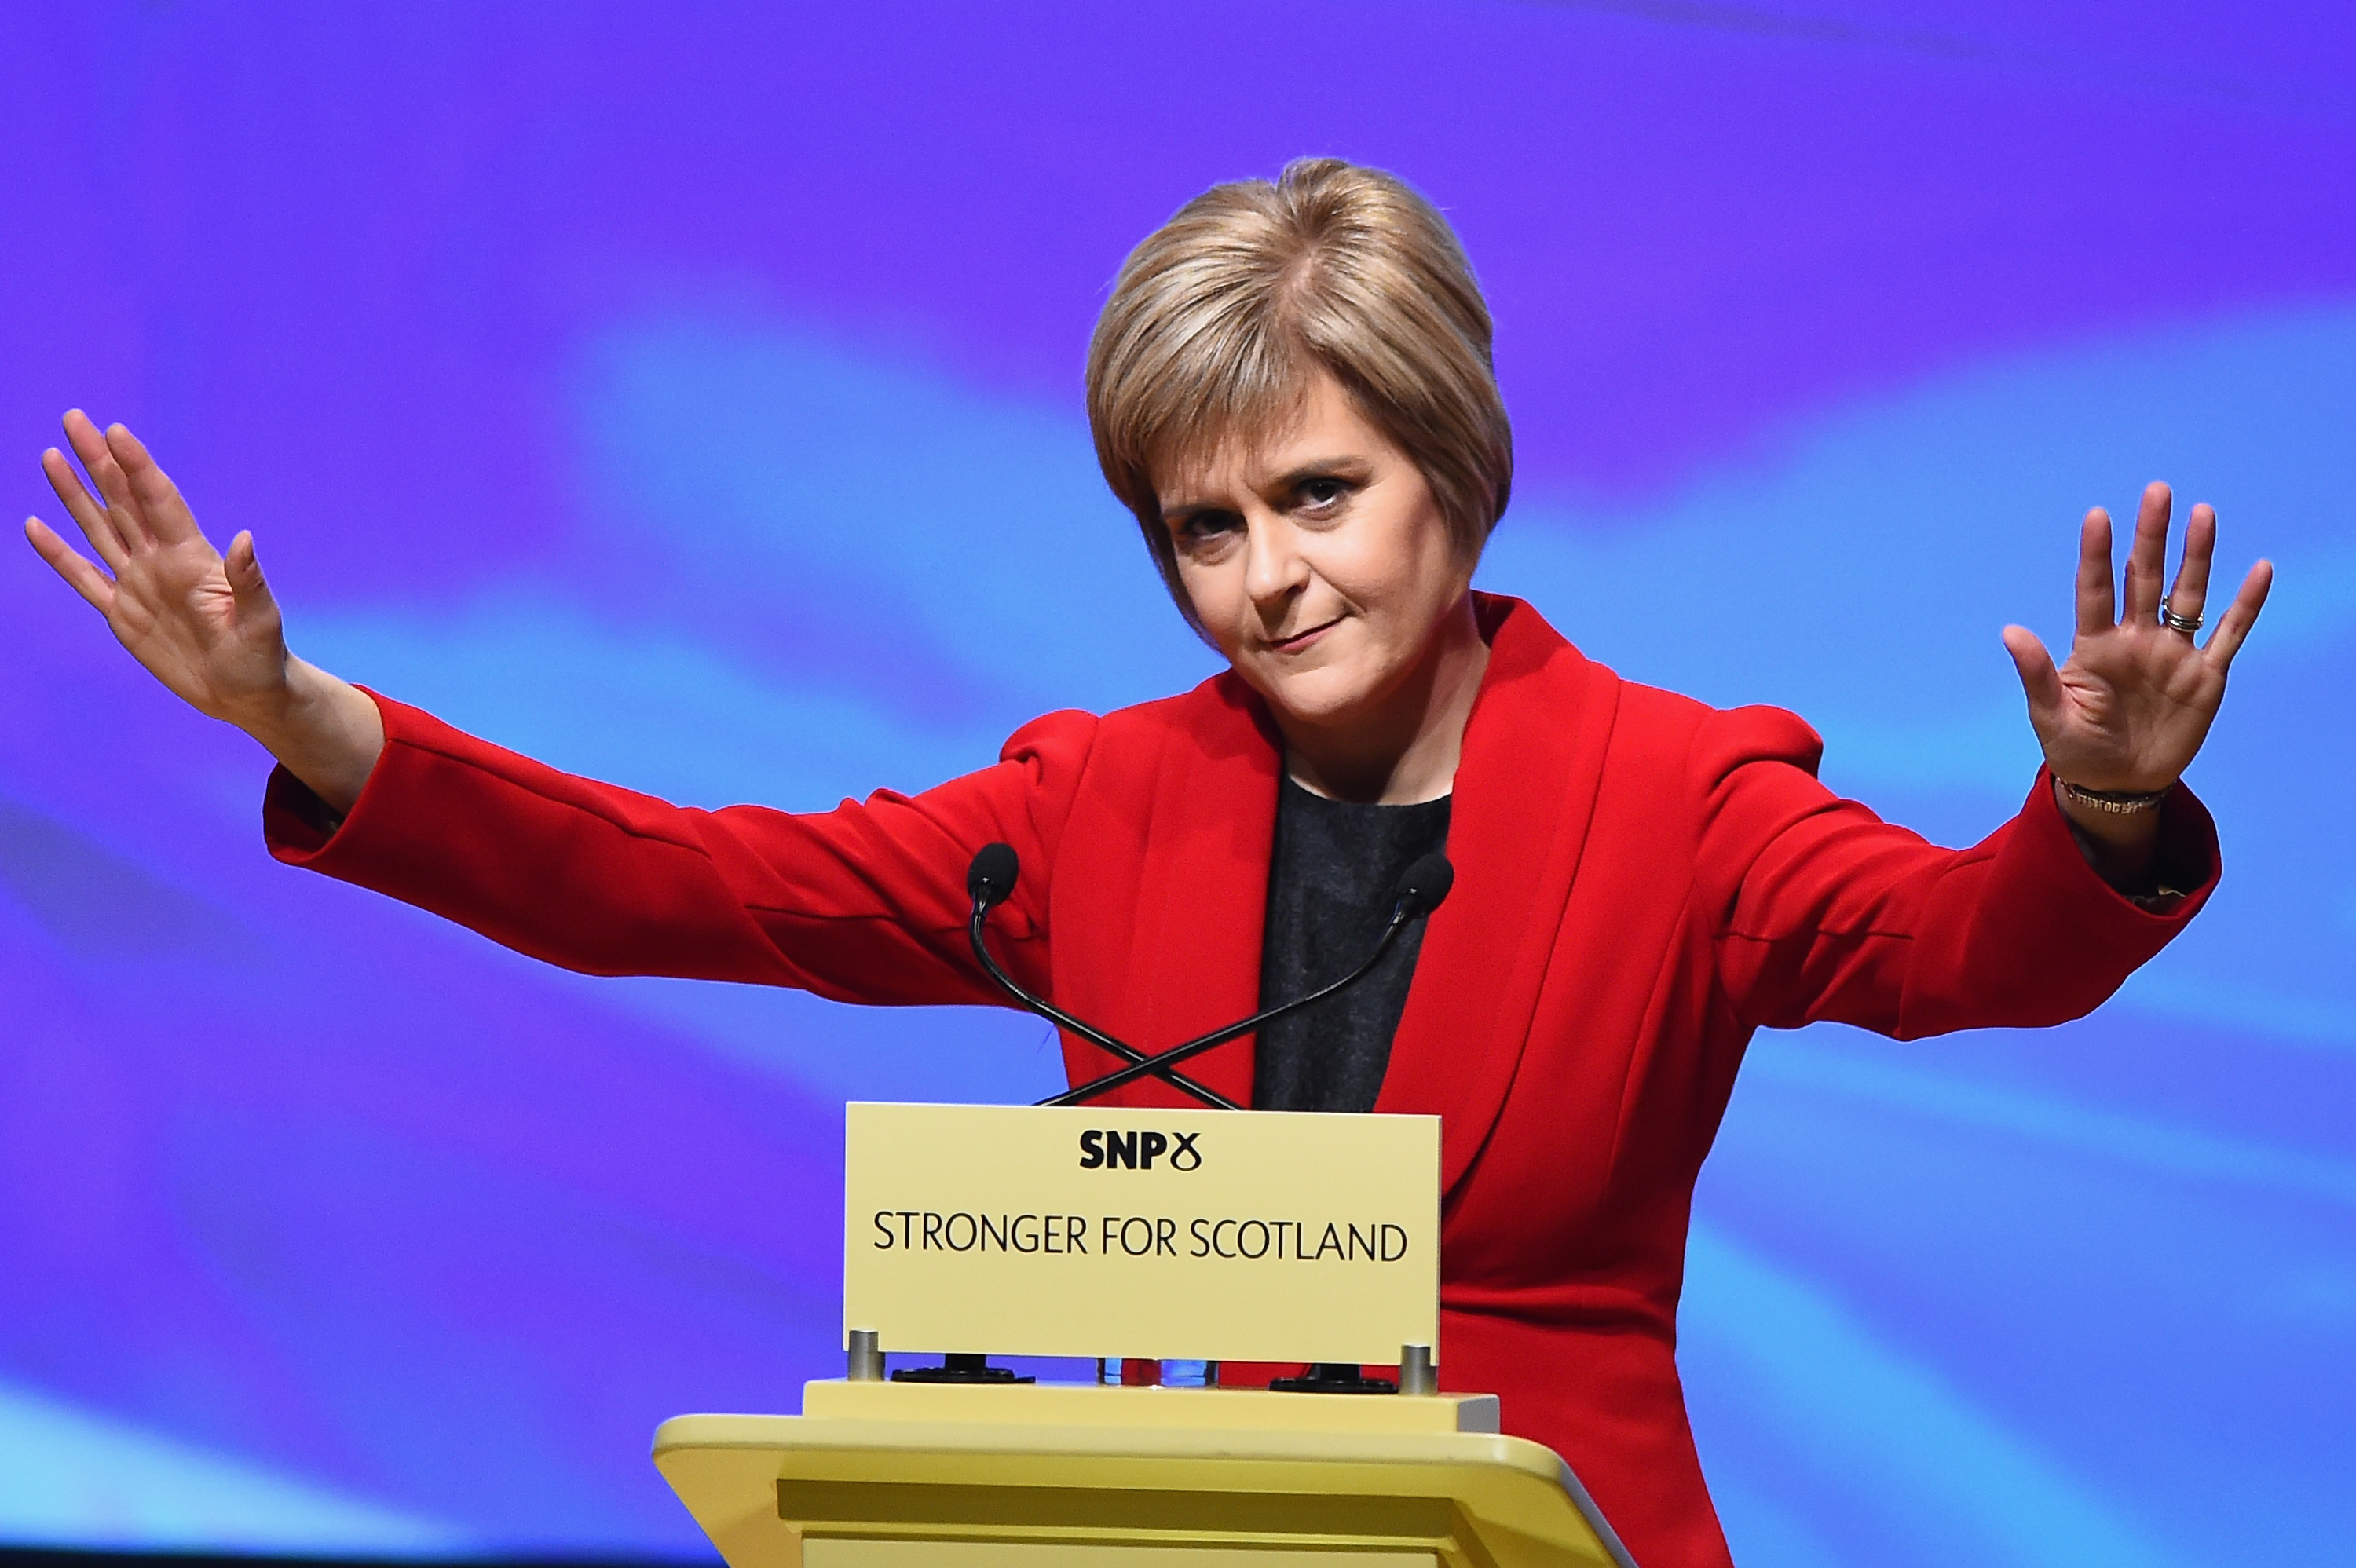 Nicola Sturgeon, gives her first key note speech as SNP party leader at the partys annual conference on November 15, 2014 in Perth, Scotland. (Jeff J Mitchell—Getty Images)